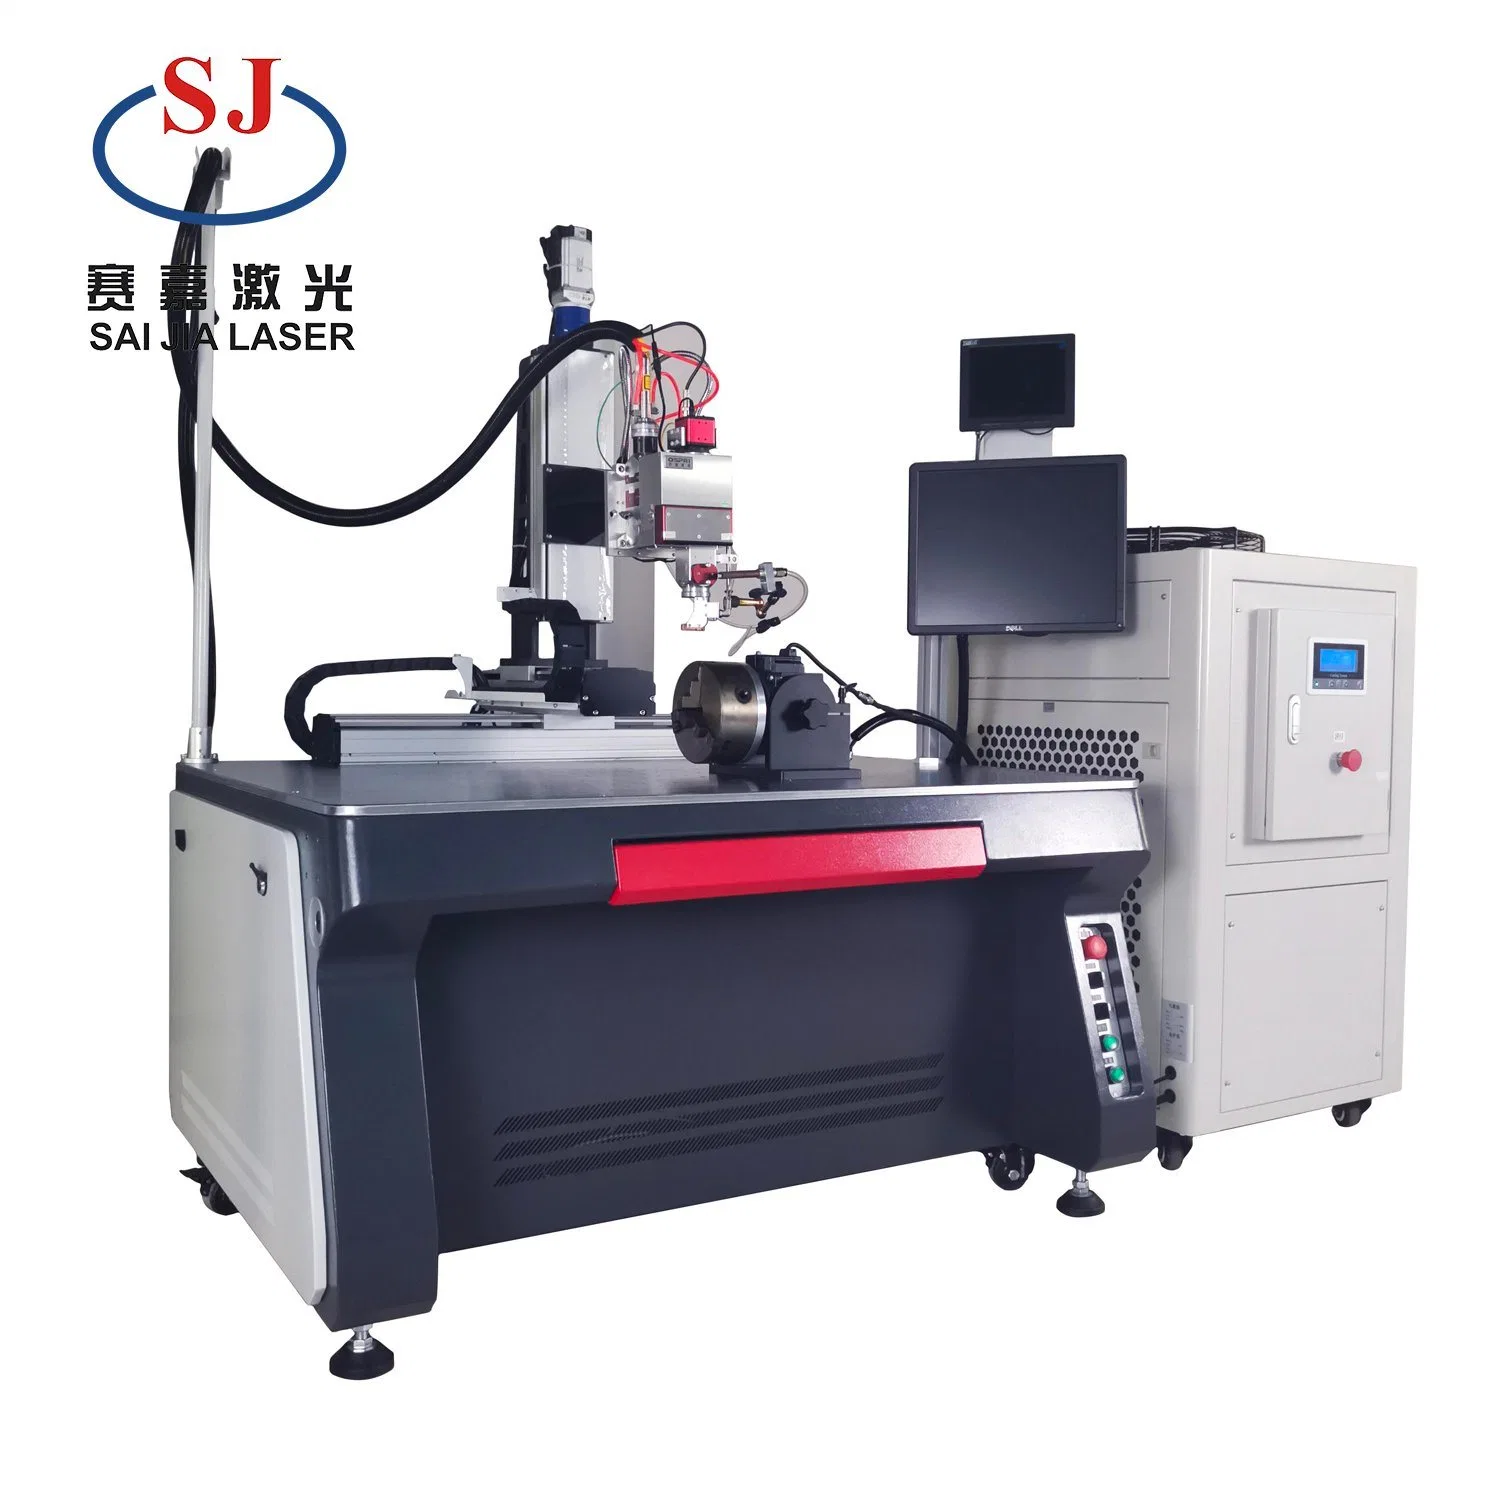 300W/500W/750W/1000W/1500W/2000W/3300W Optical Fiber Laser Continuous Welding Machine for Photoelectric Communication Devices